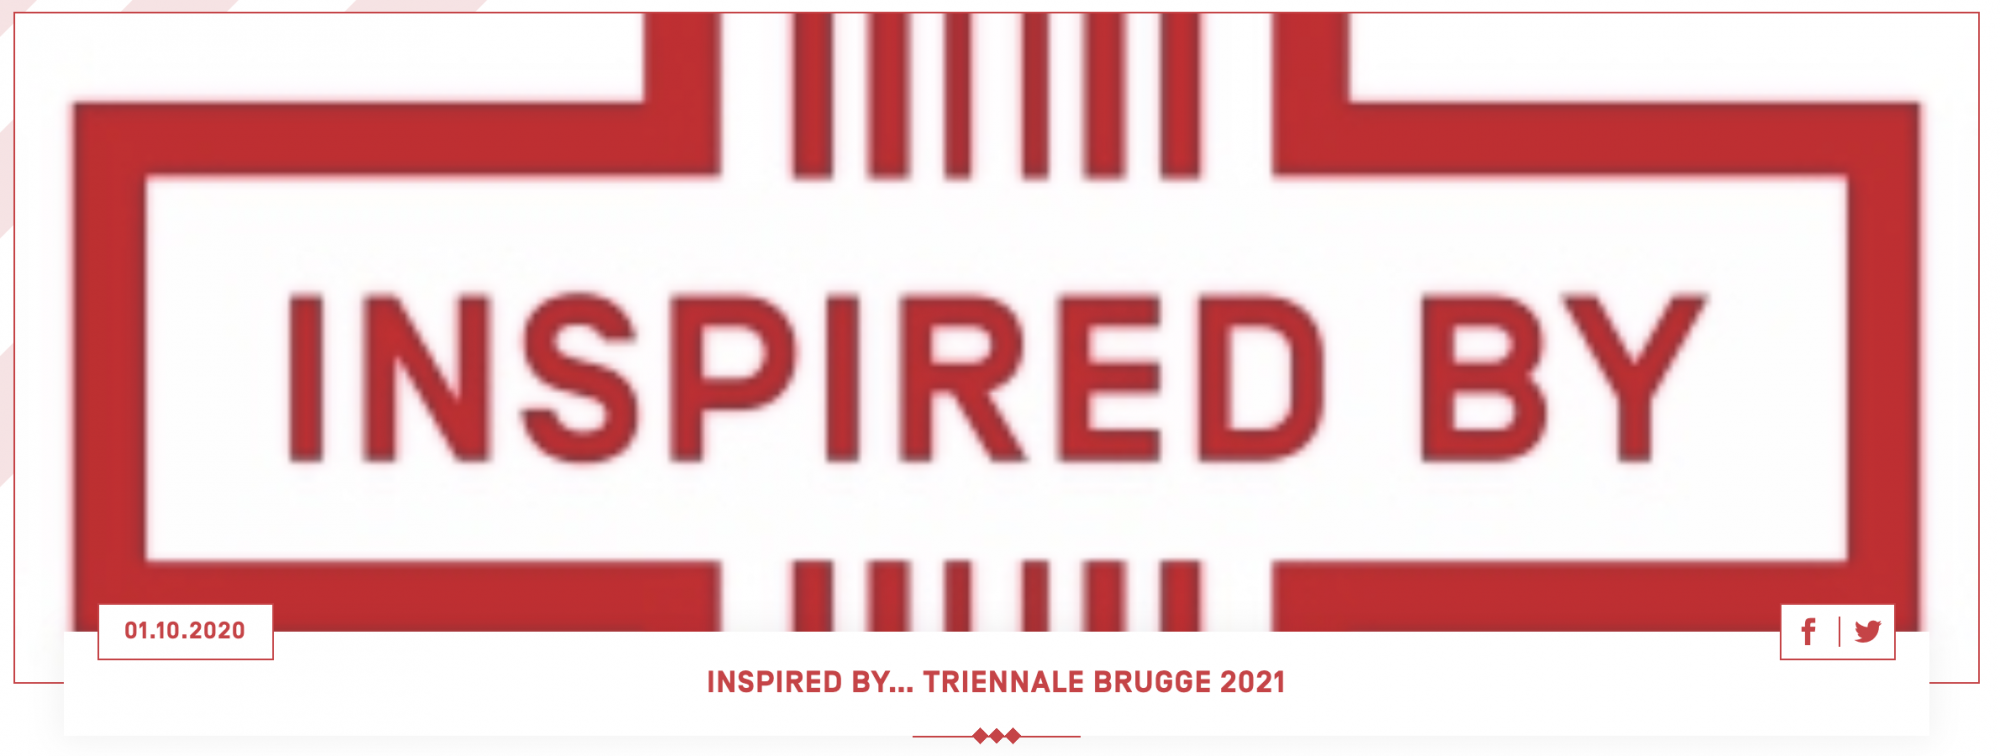 INSPIRED BY… TRIENNALE BRUGGE 2021